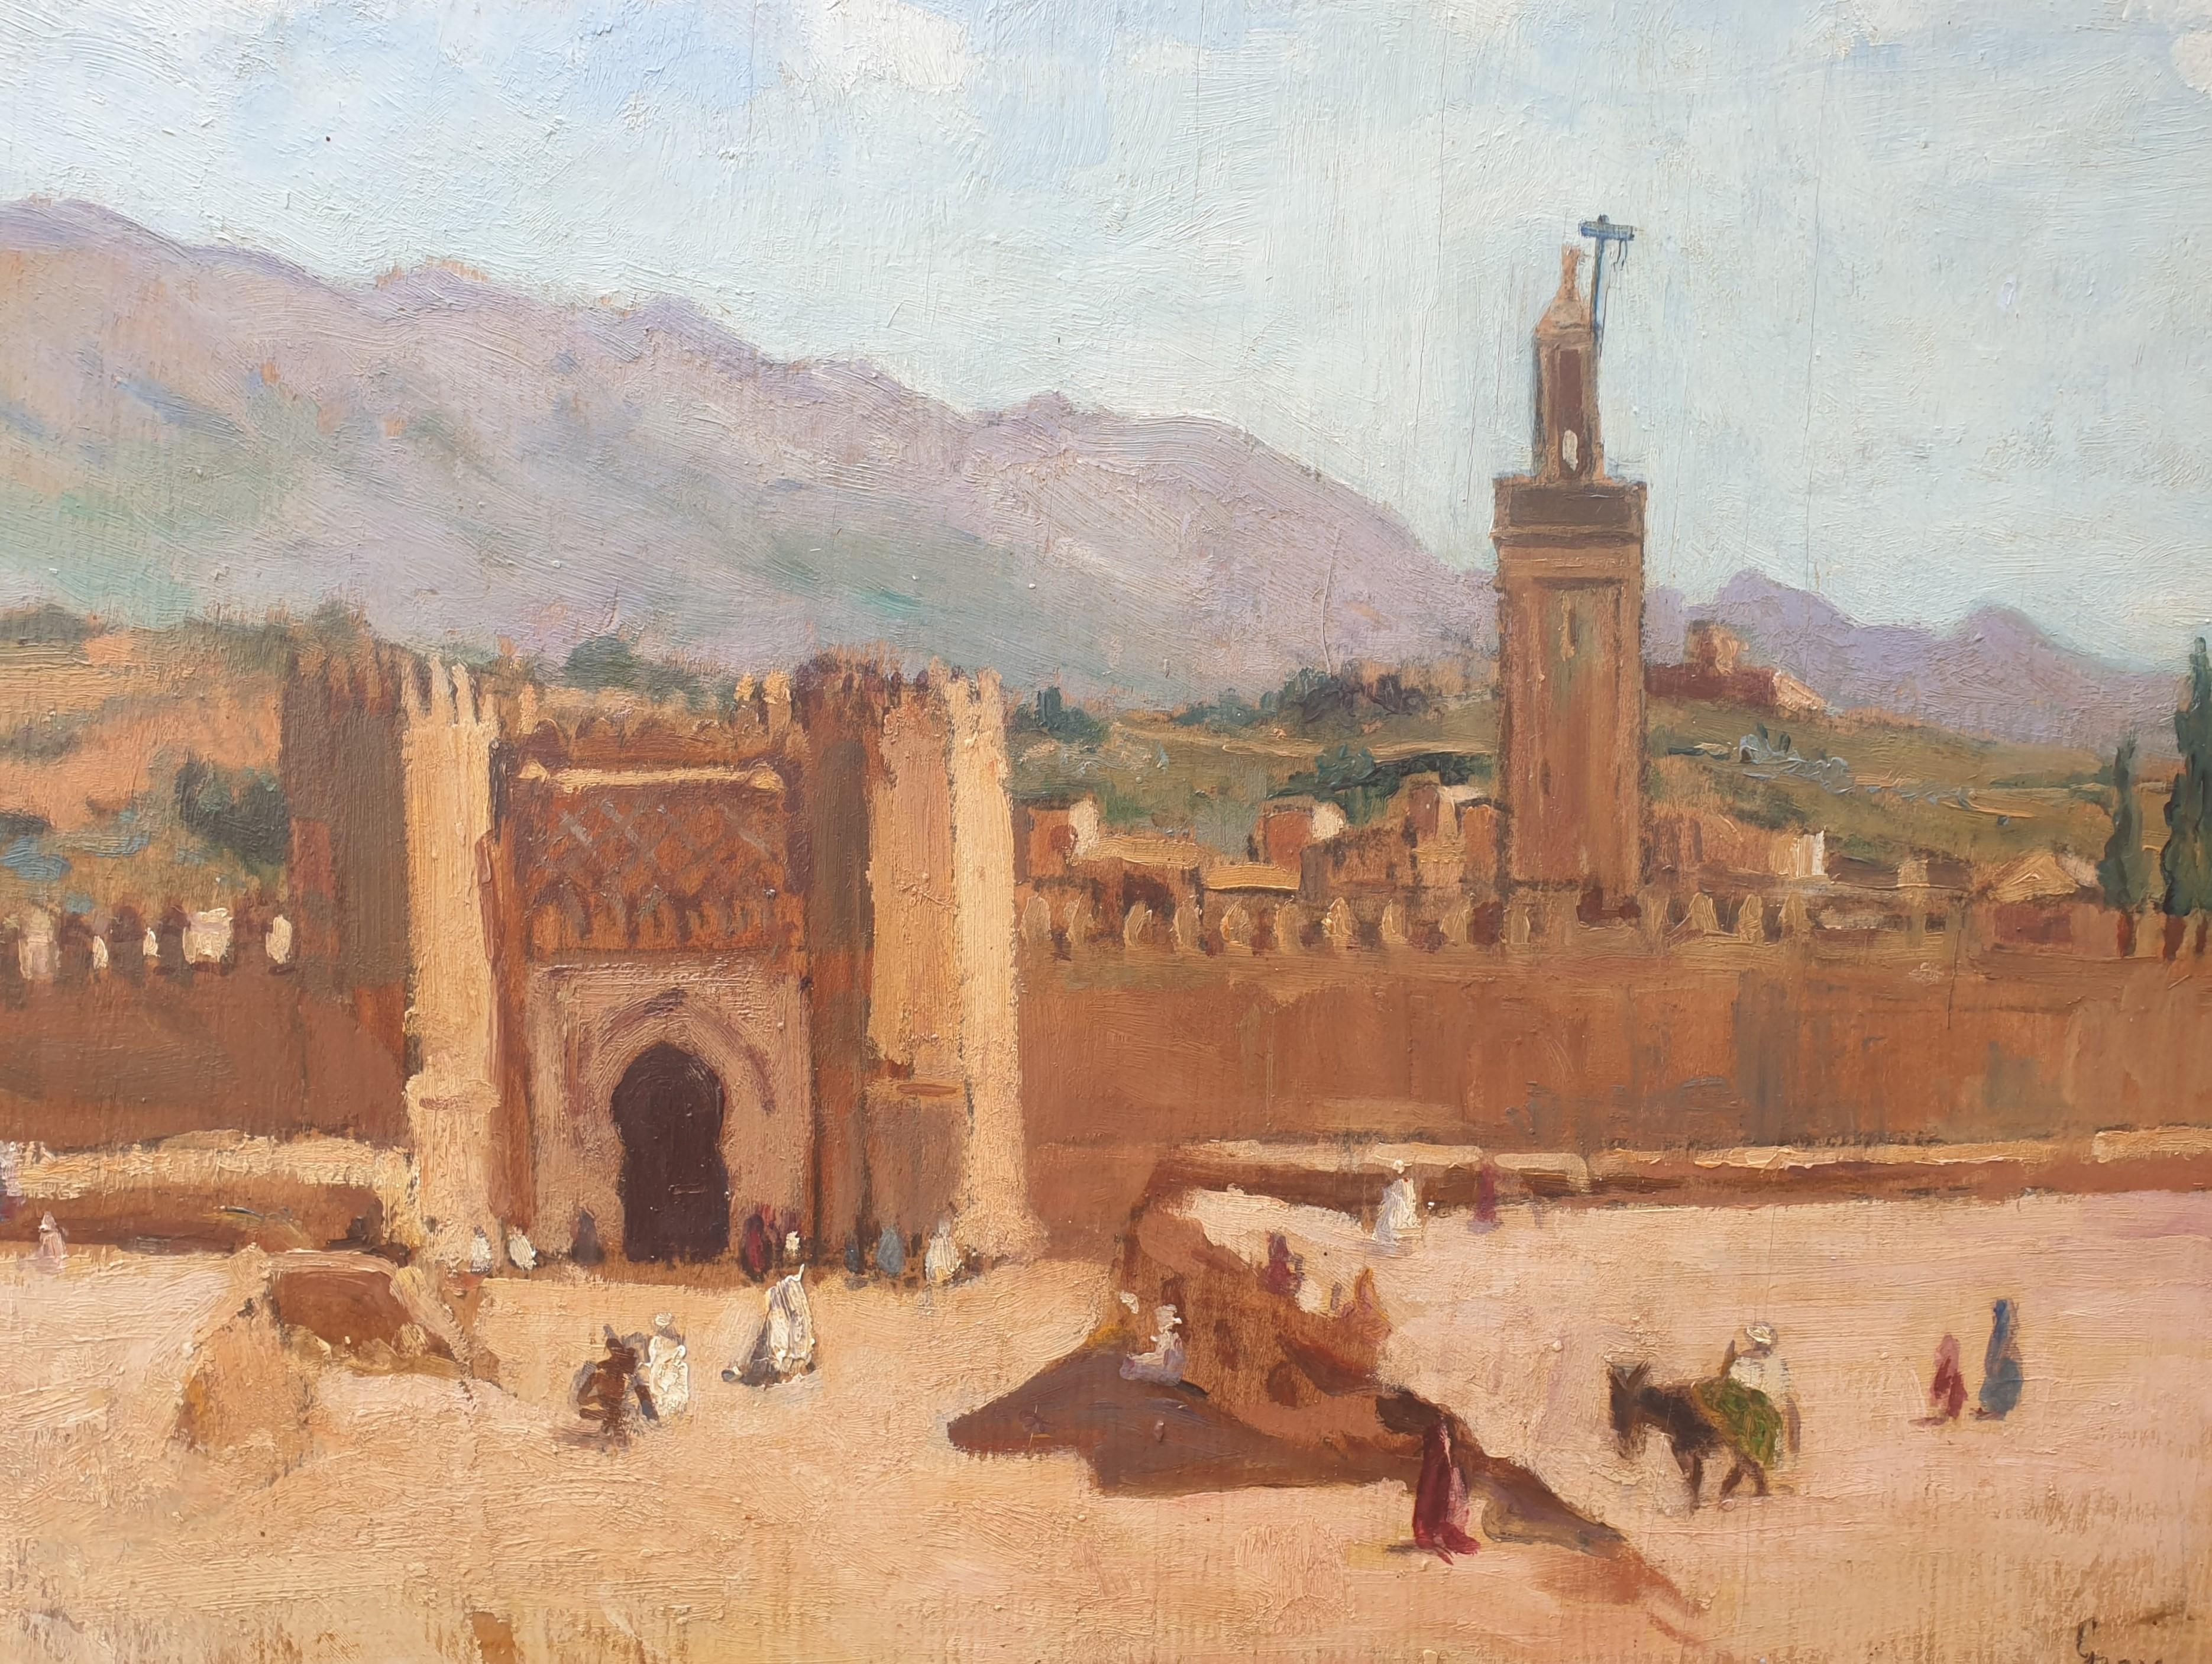 Germaine REY
(20th century)

Oil on panel
35.5 x 66 cm (53 x 83.5 cm with frame)
Signed lower right “GRey” and dated on the reverse “1933”
Inscription on the back “Bab Delkaken Gate in Fez painted by Germaine Rey in the company of Henri Pontoy”
Very